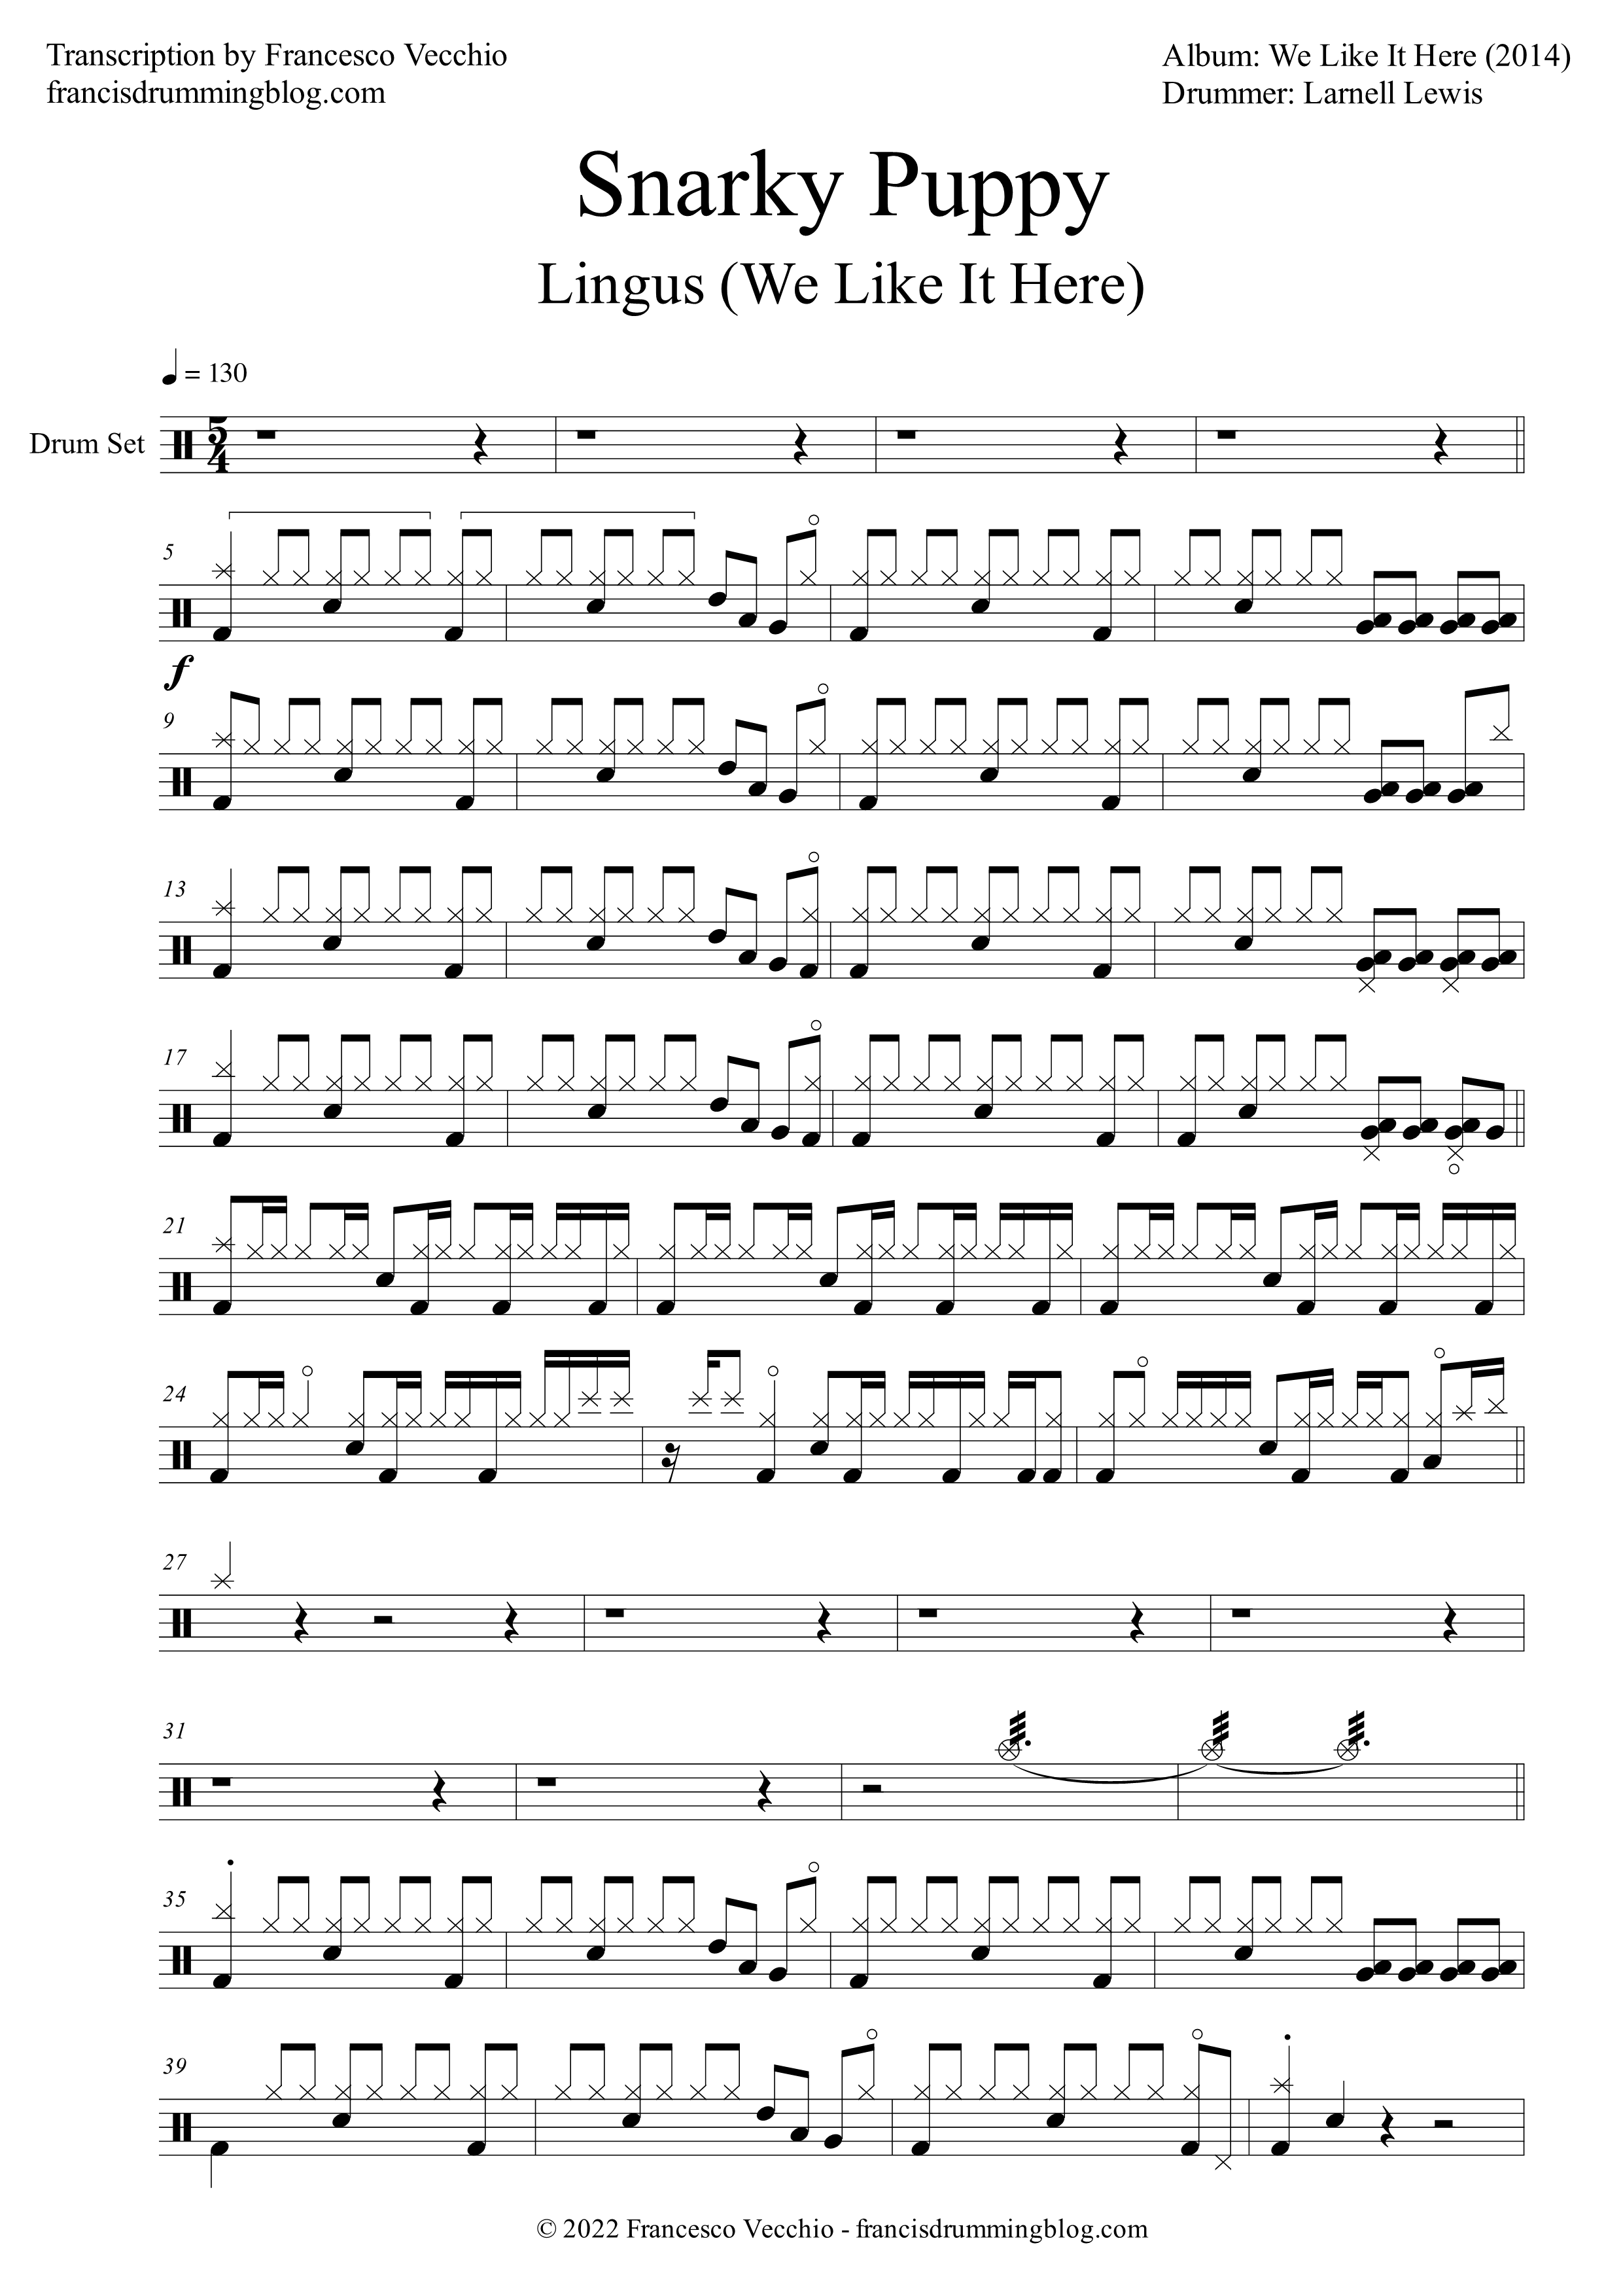 snarky-puppy-lingus-drum-sheet-music-1